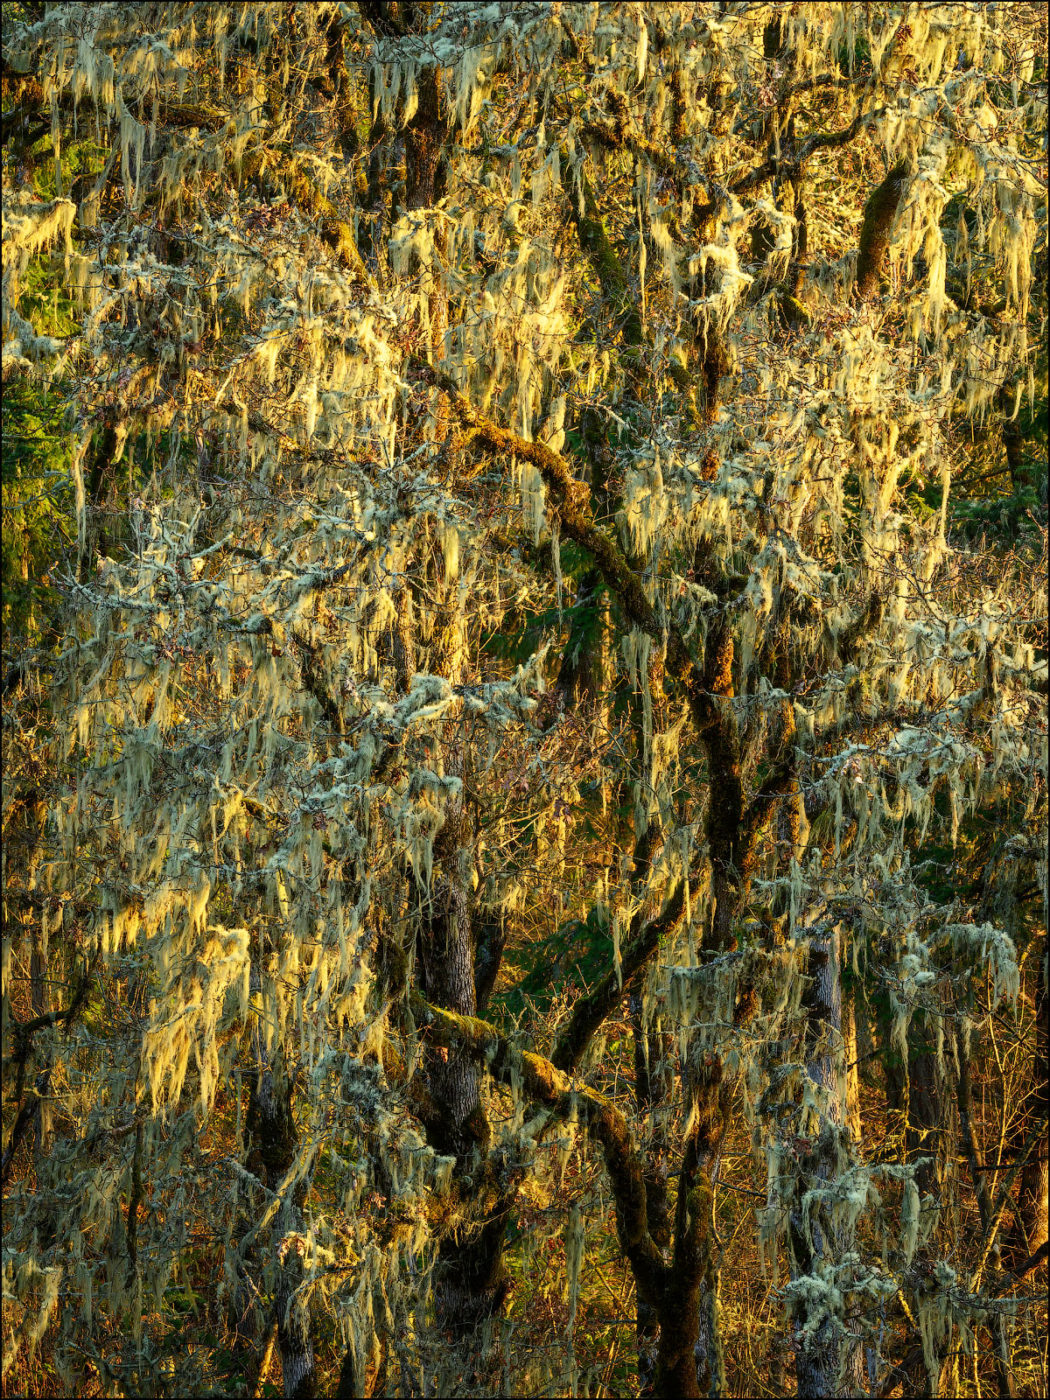 An Oregon oak tree in winter with sunlit lichen hanging from bare branches.